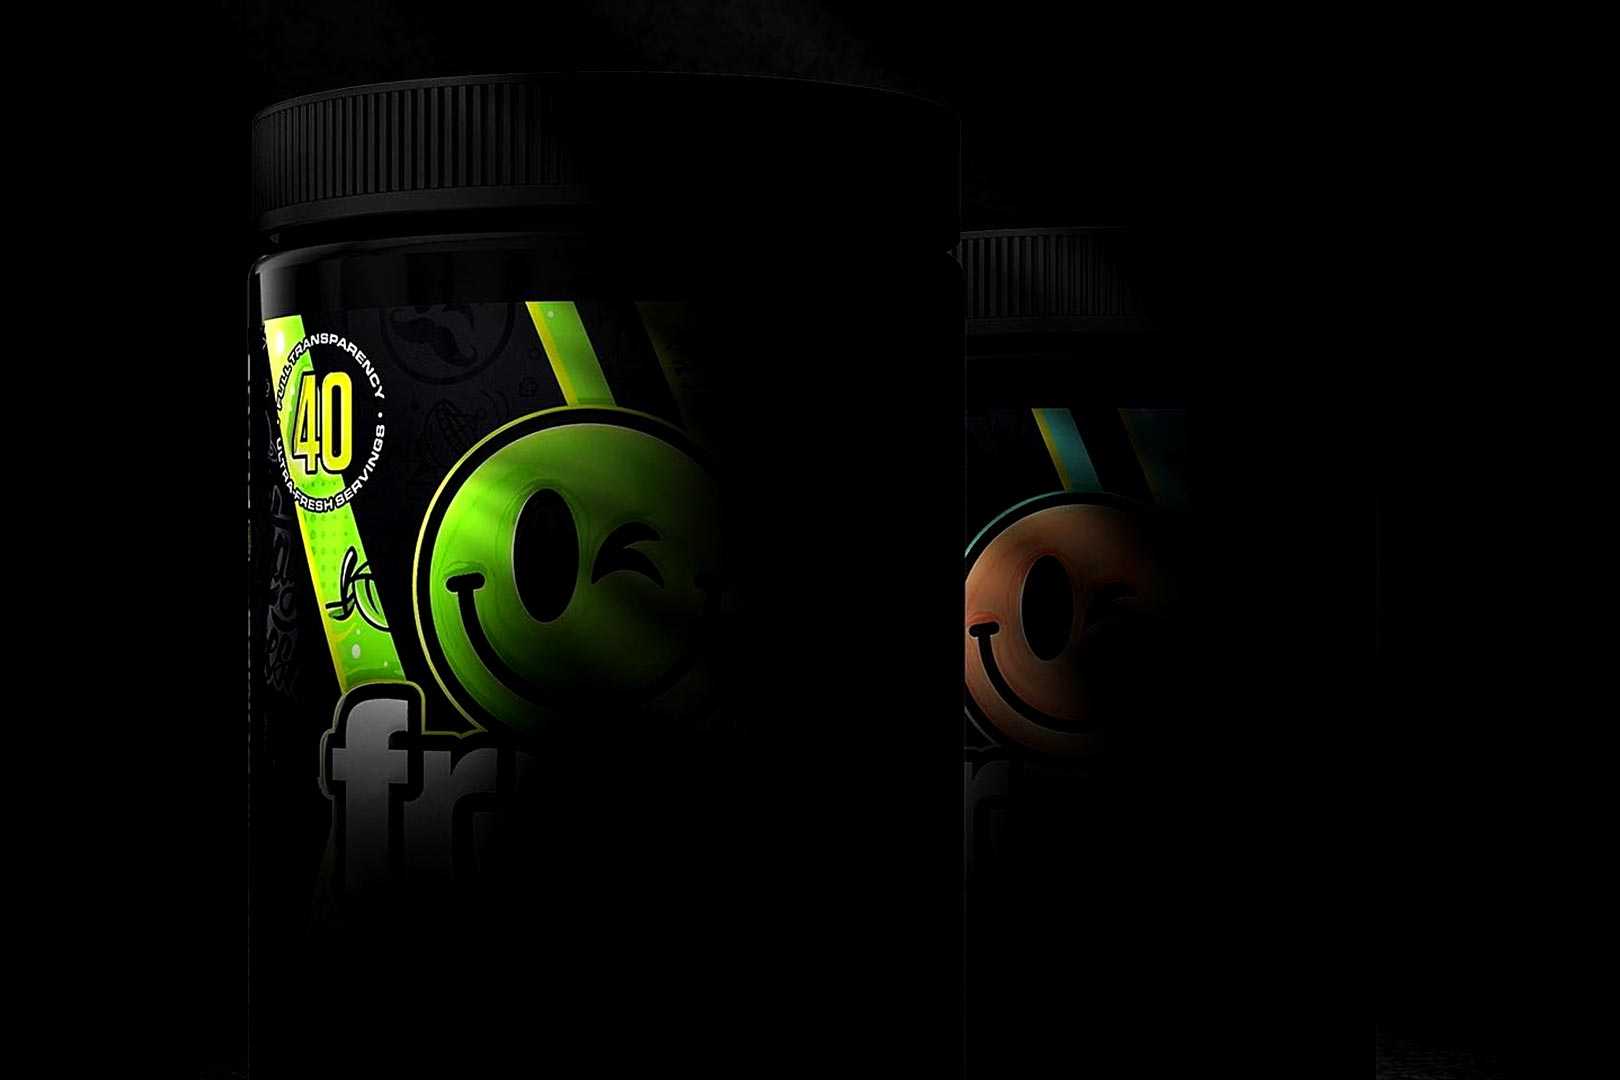 Fresh Supps Mystery Flavors Or Product